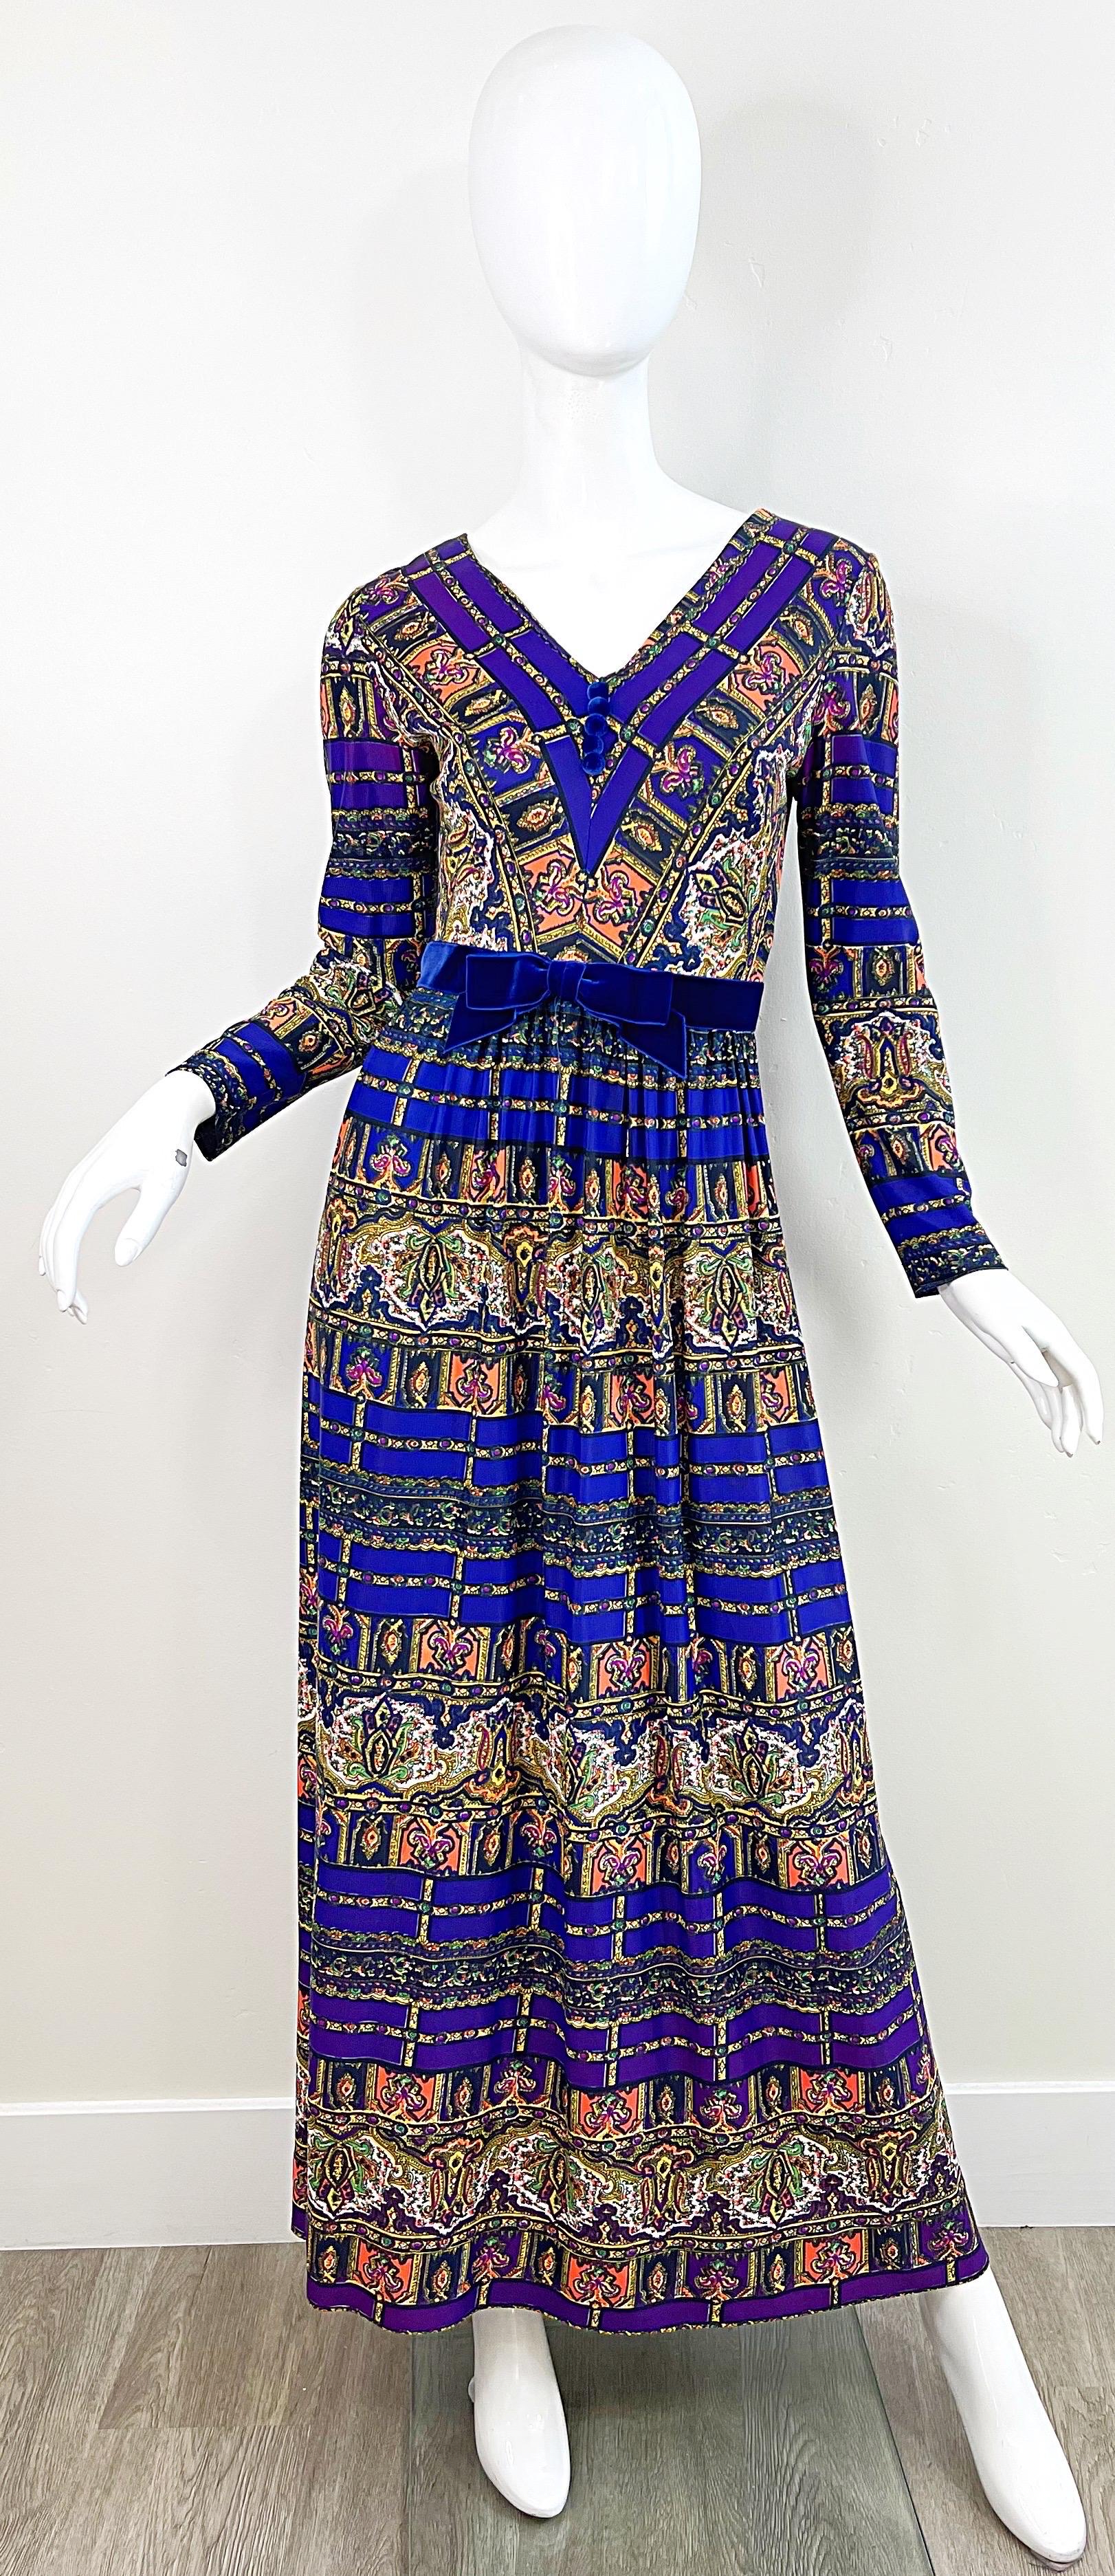 Amazing 1970s Moroccan print long sleeve purple maxi dress ! Features vibrant colors of orange, fuchsia, green yellow, pink and blue throughout. Royal velvet bow belt attached at waist. Hidden metal zipper up the back with hook-and-eye closure.